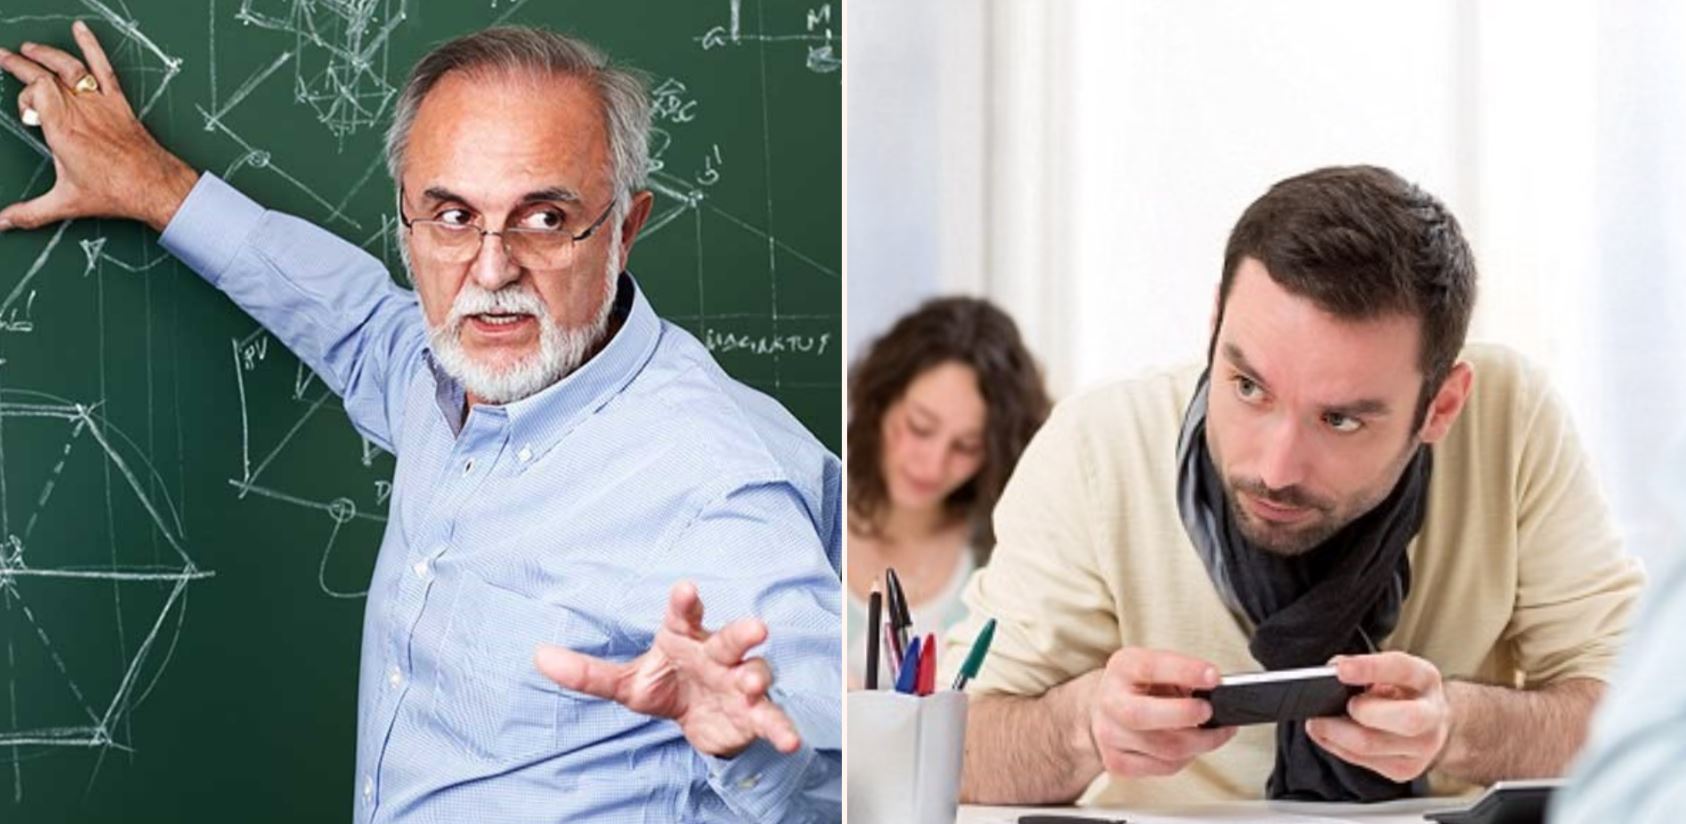 Teacher creates cheeky exam question to find cheaters and catches 14 students